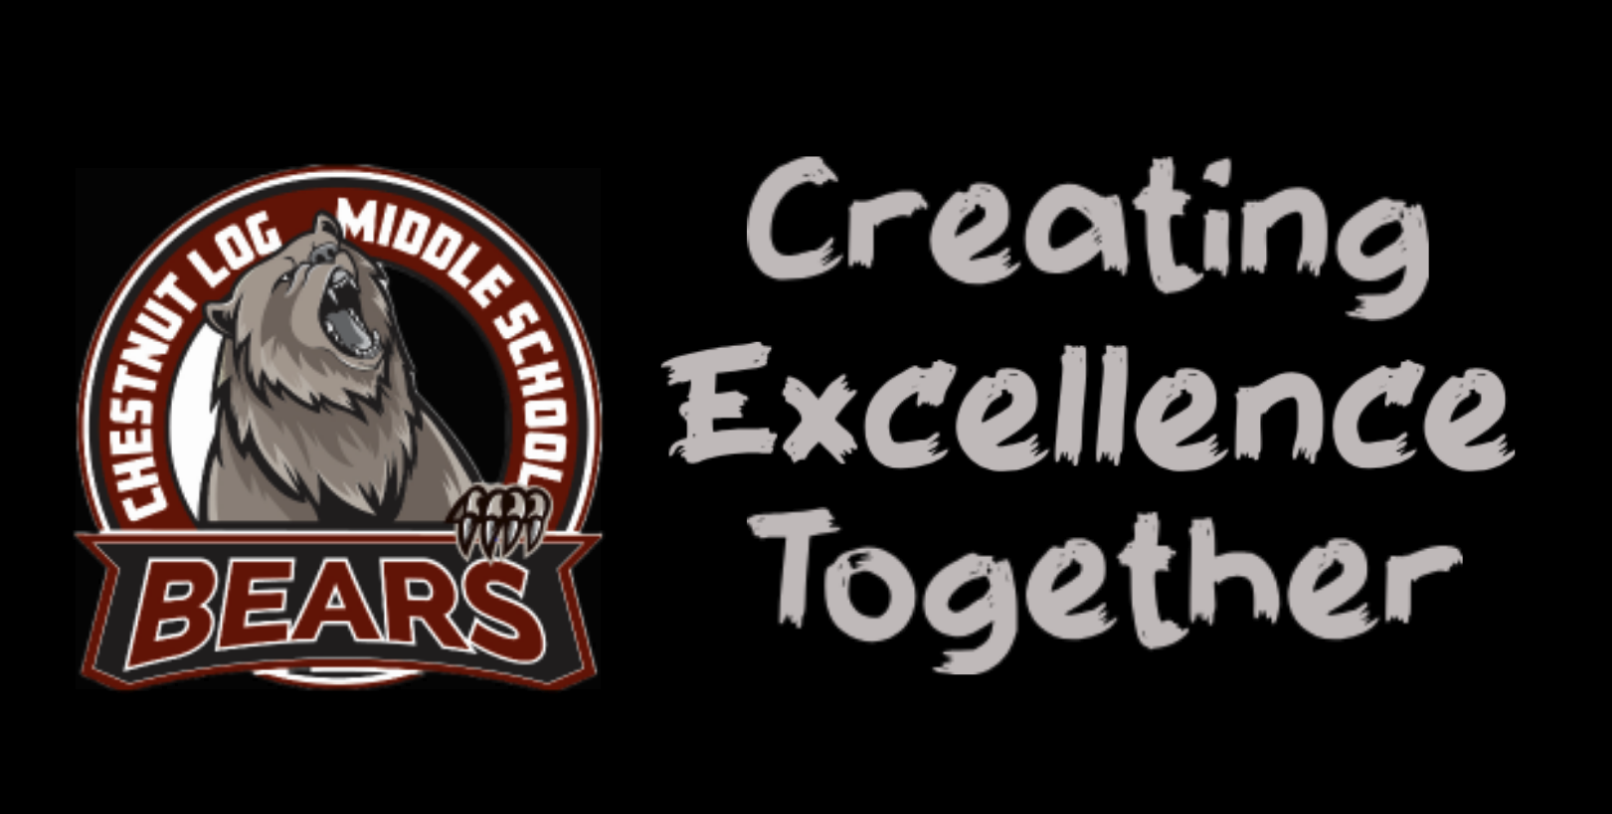 Creating Excellence Together